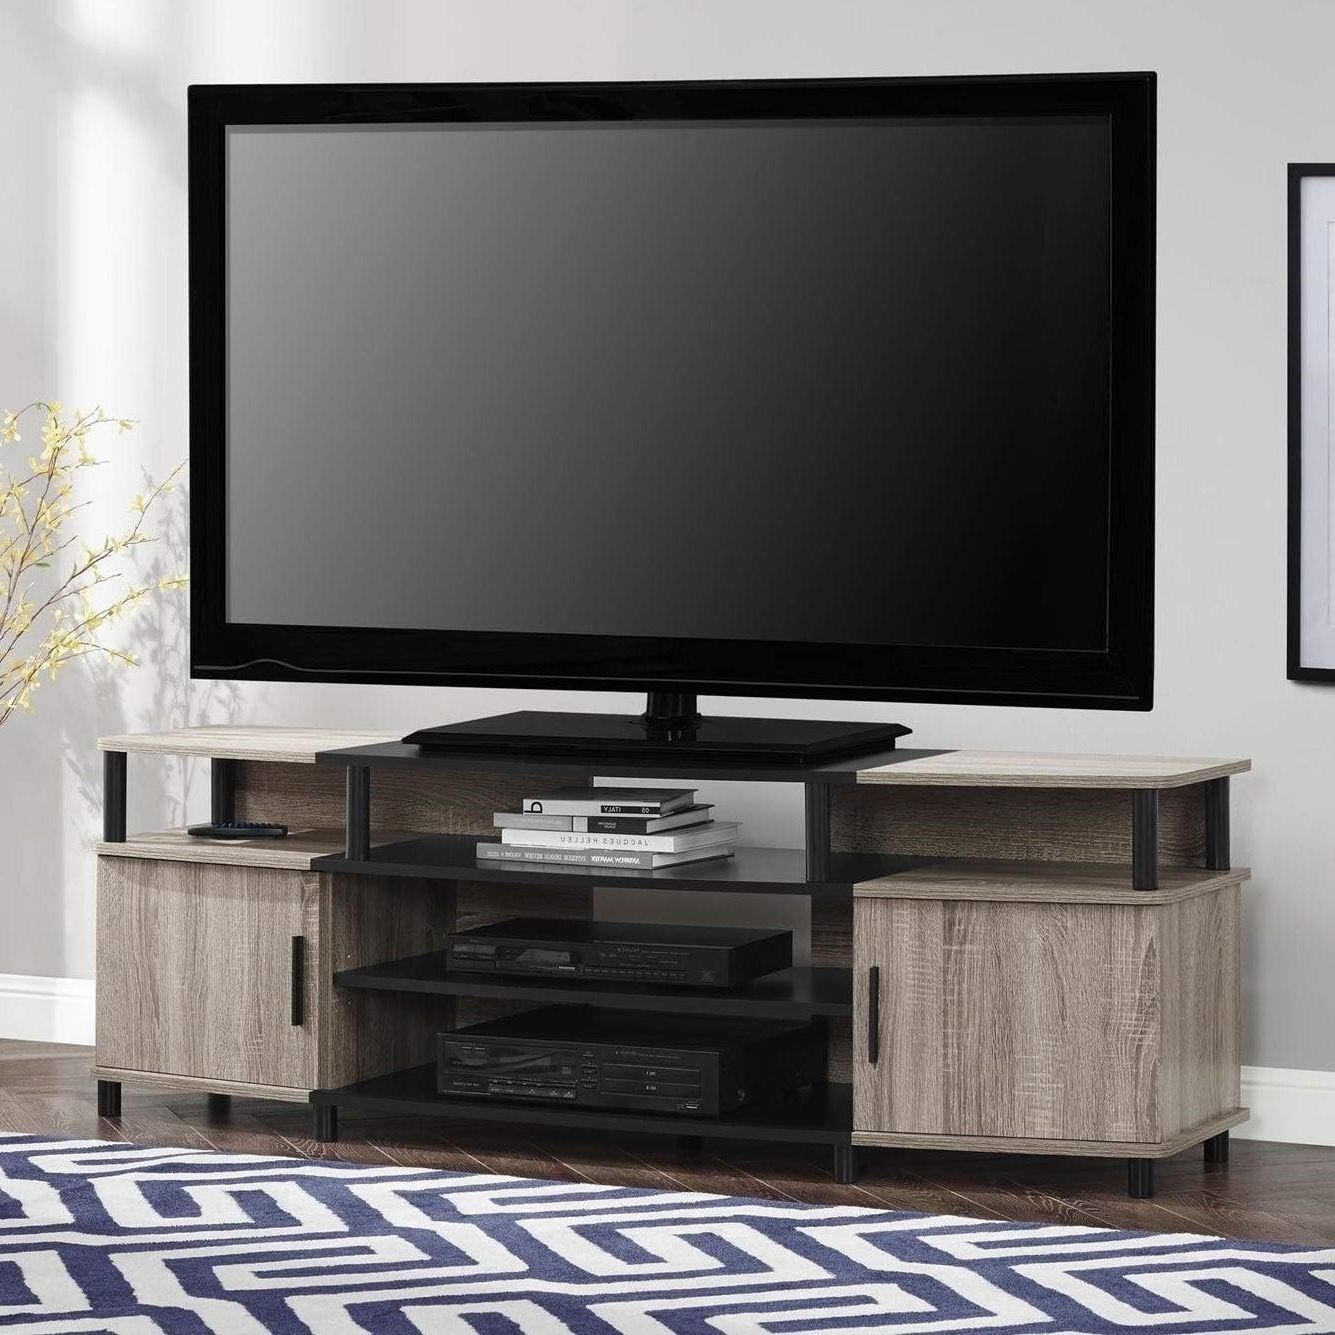 Farmhouse Tv Stands For 70 Inch Tv With Regard To Well Liked Amazon: 70 Inch Tv Stand Black Farmhouse Mdf Metal: Home & Kitchen (View 9 of 15)